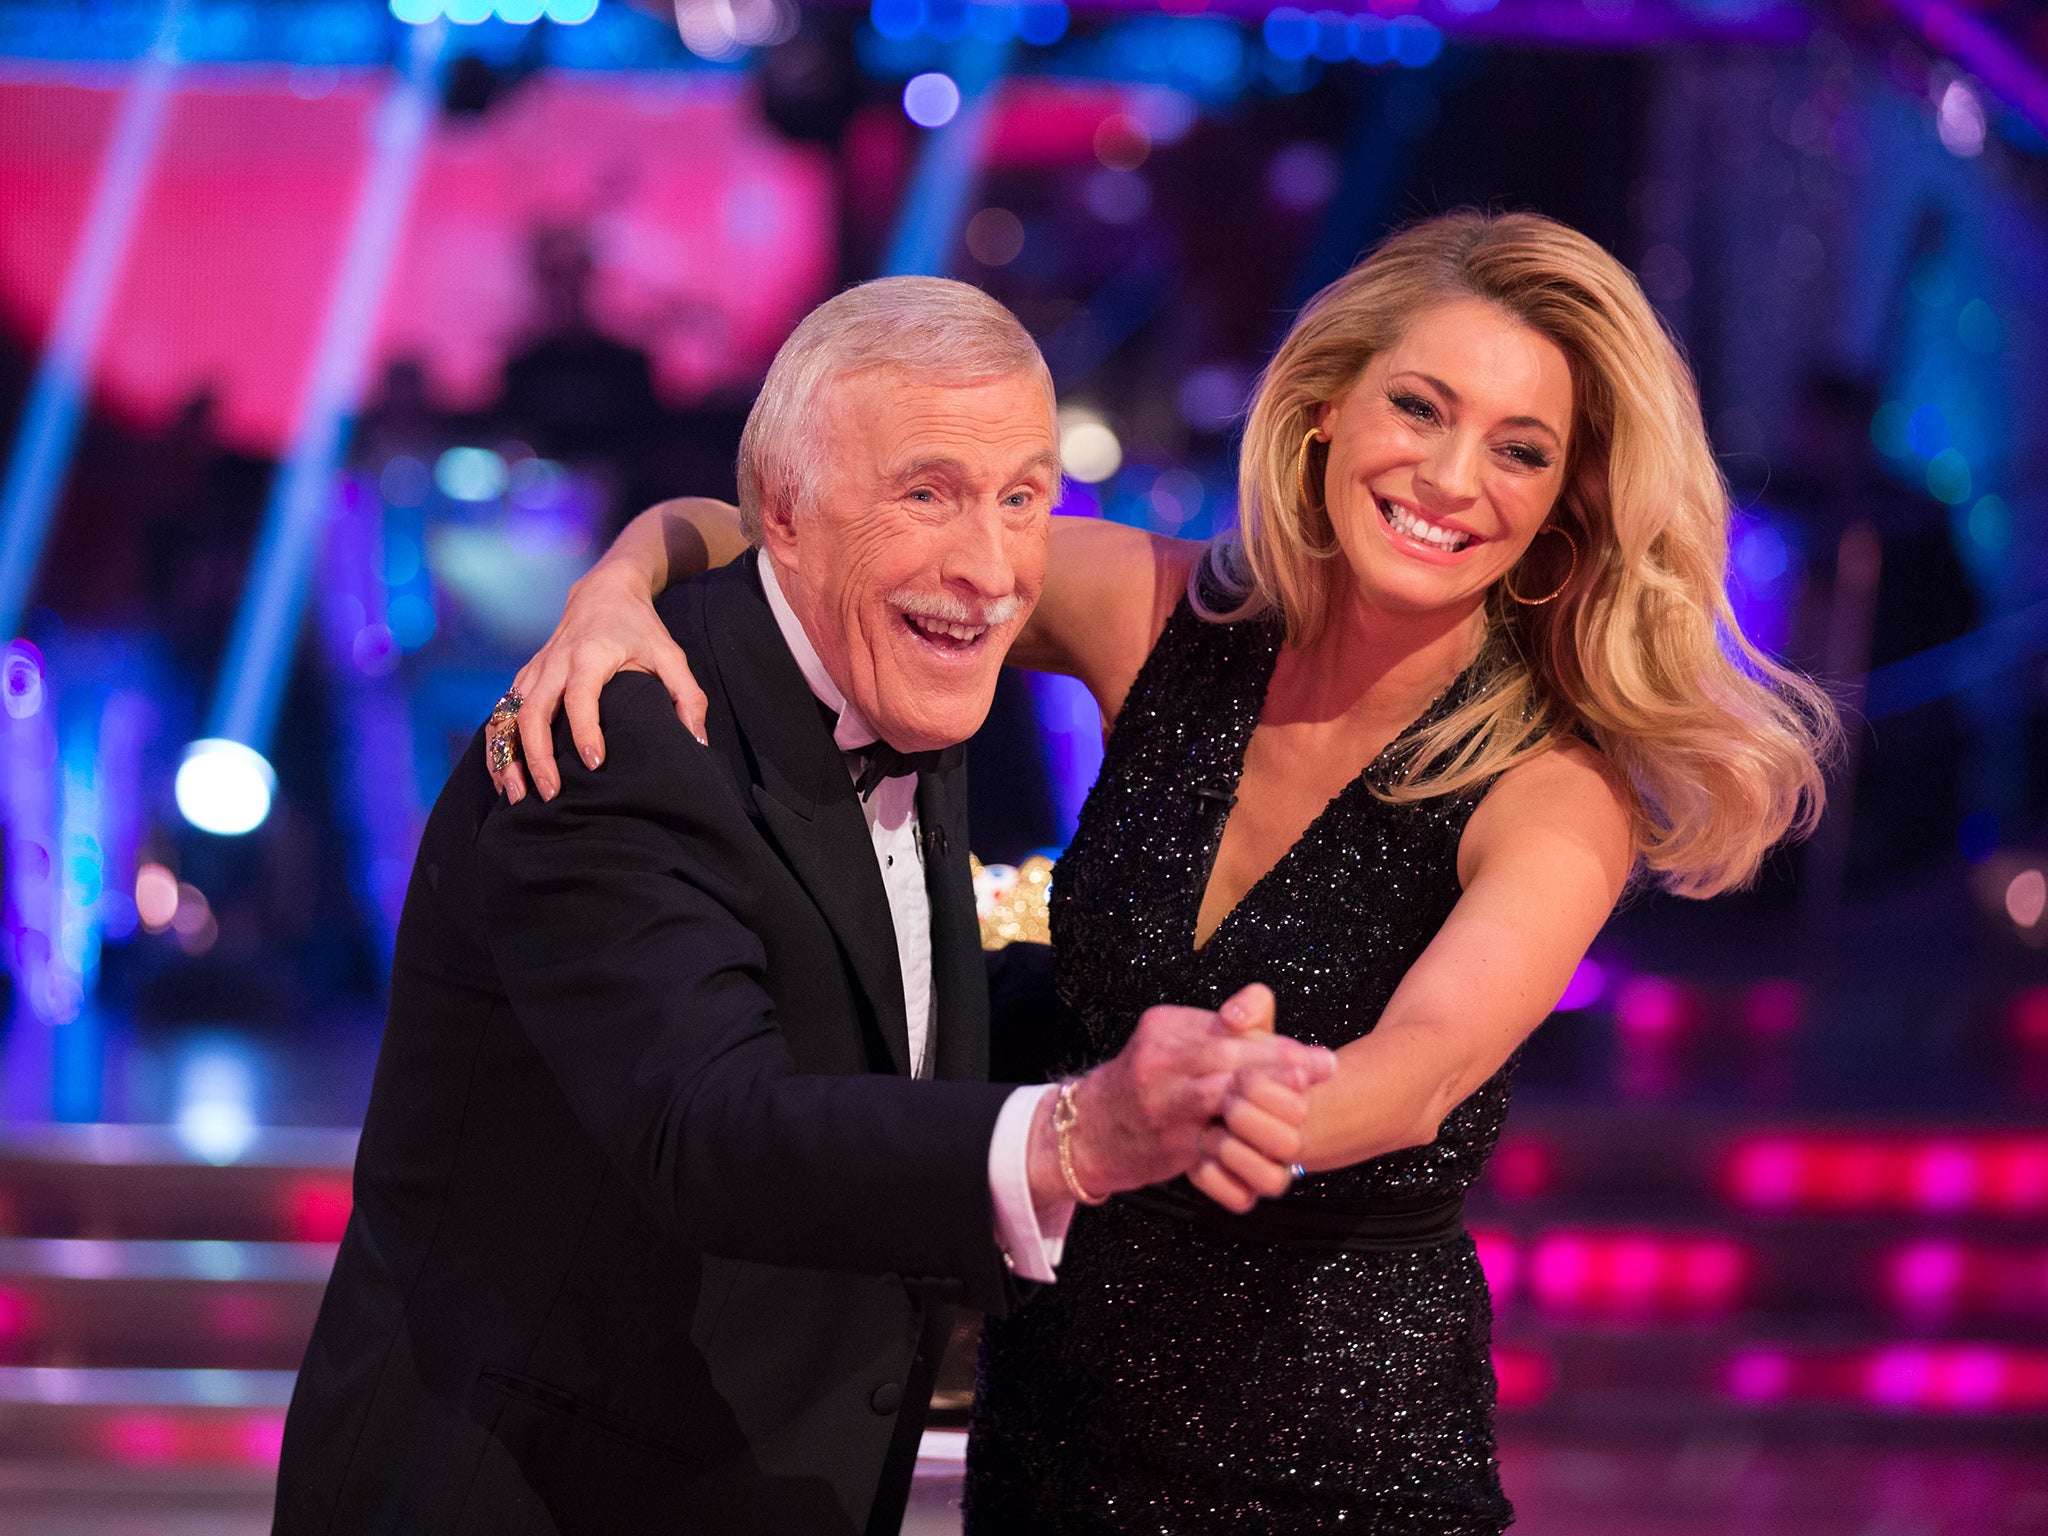 Sir Bruce Forsyth rejoins Tess Daly to host the Strictly Come Dancing Children in Need special